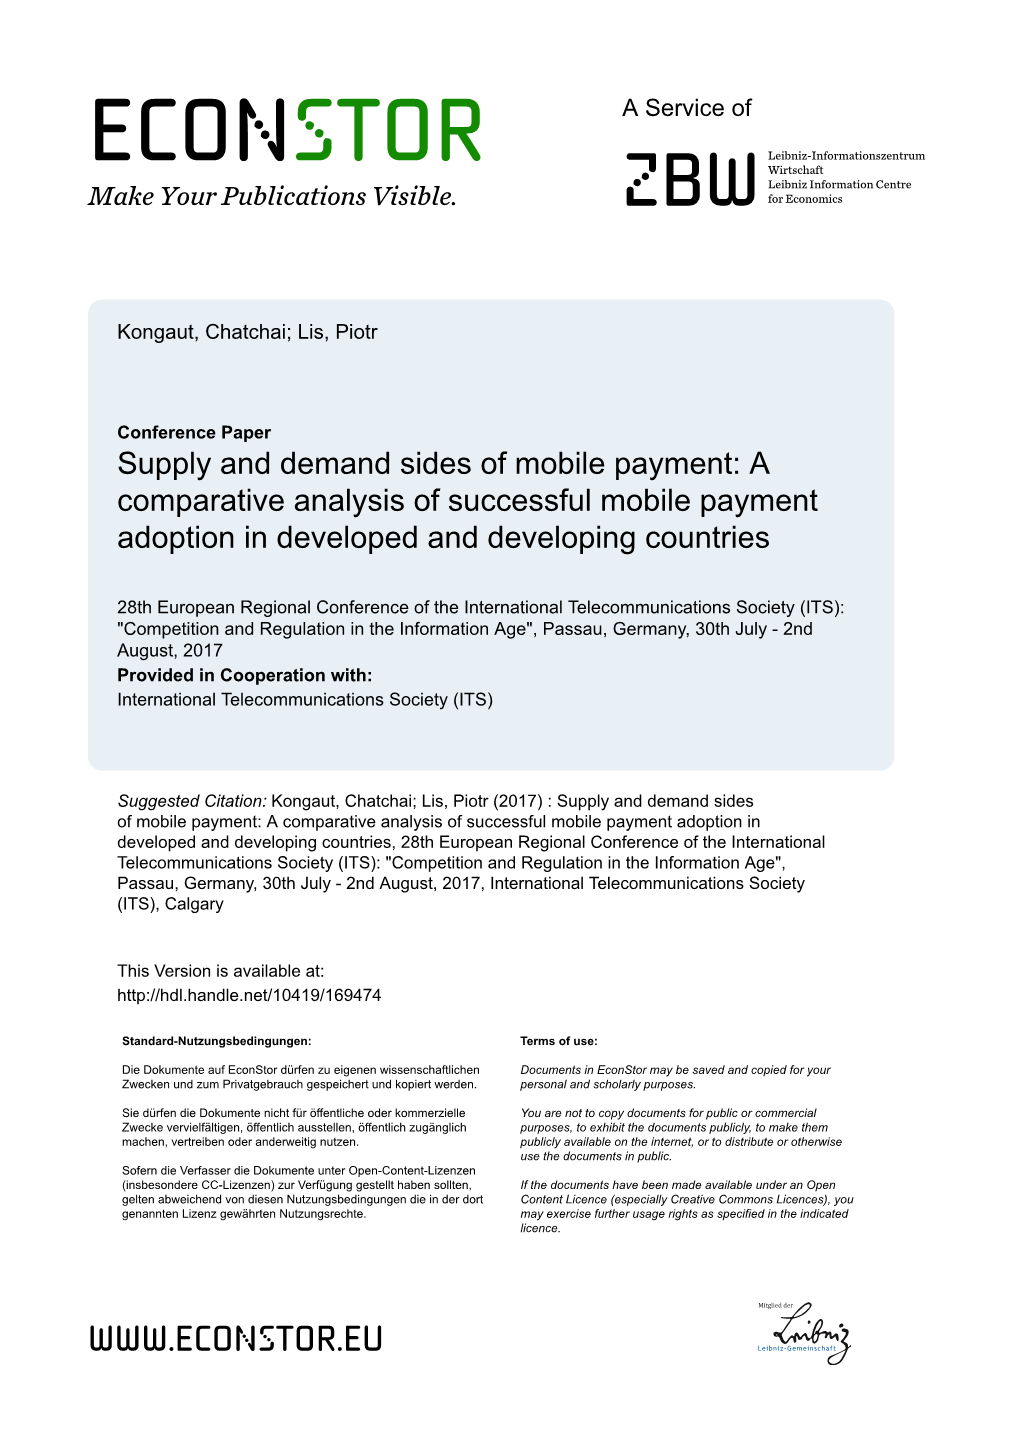 A Comparative Analysis of Successful Mobile Payment Adoption in Developed and Developing Countries